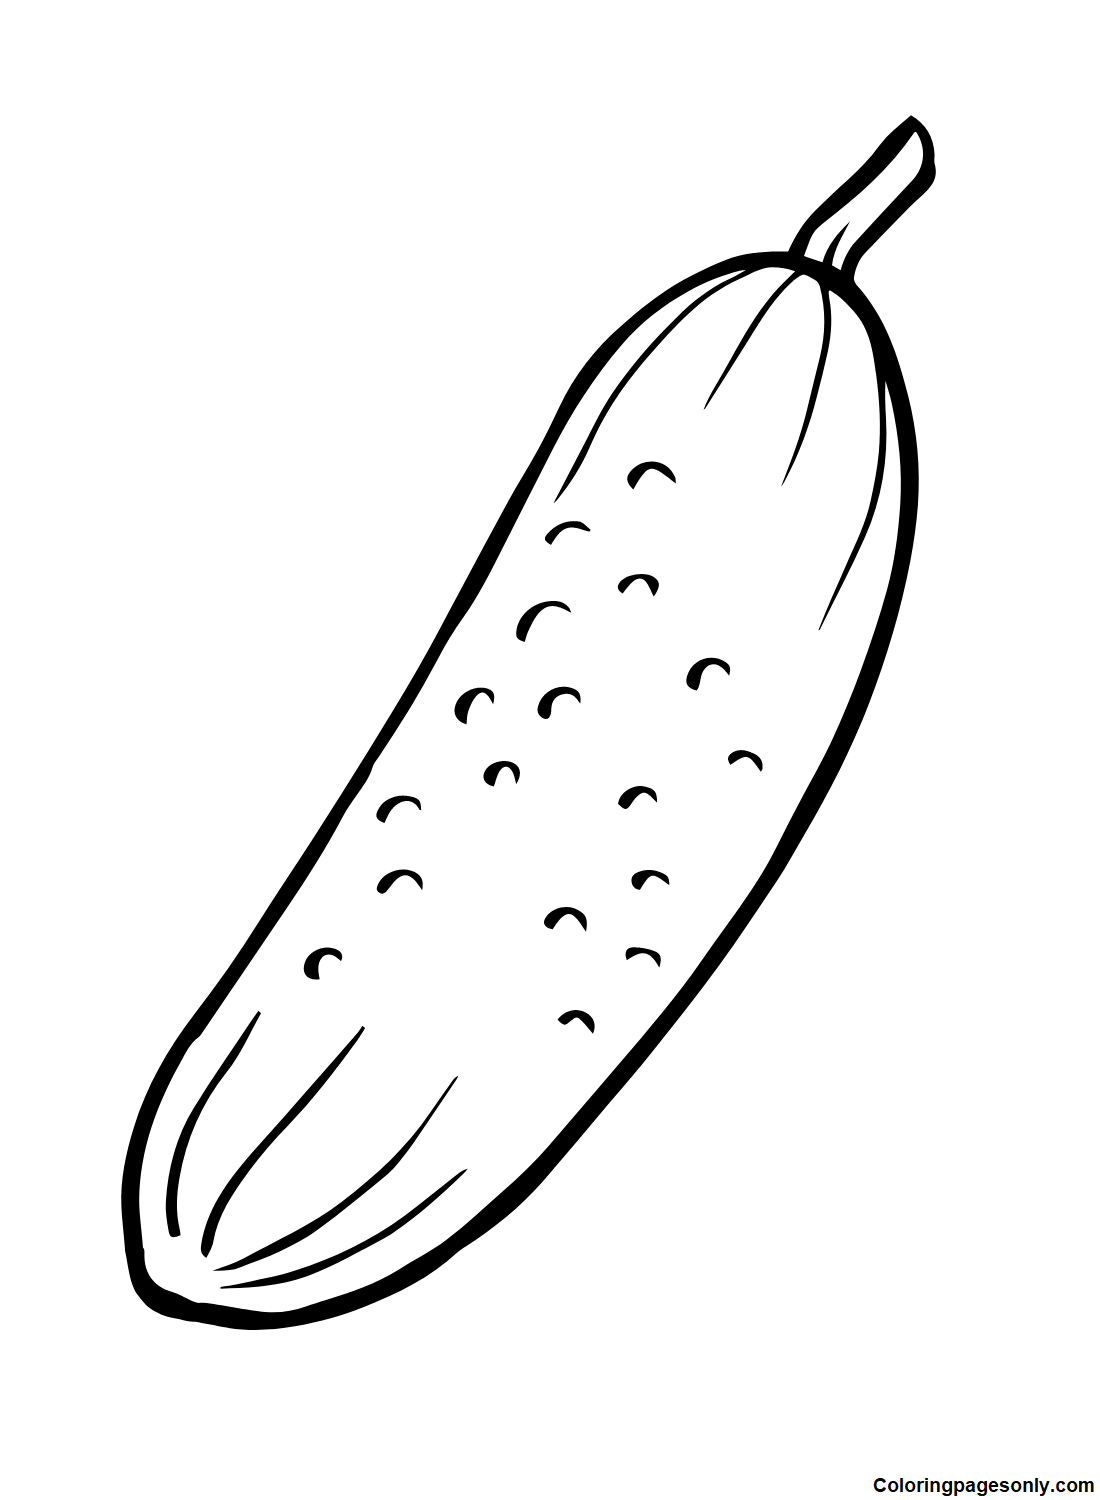 Cucumber to Print Coloring Page